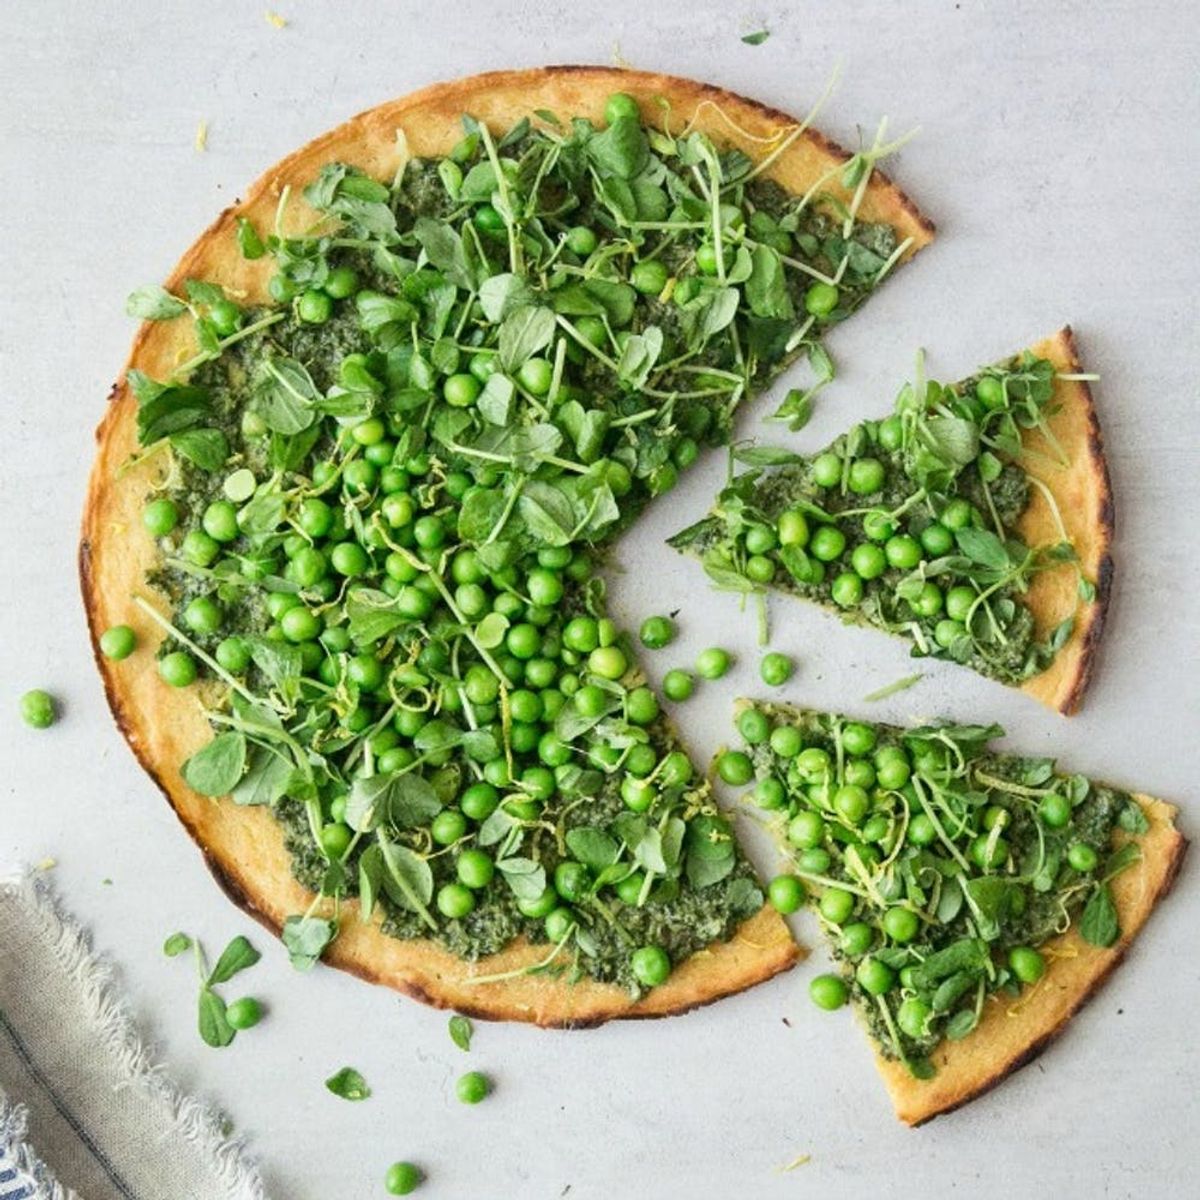 17 Rustic Veggie Pizzas to Liven Up Your Meatless Monday